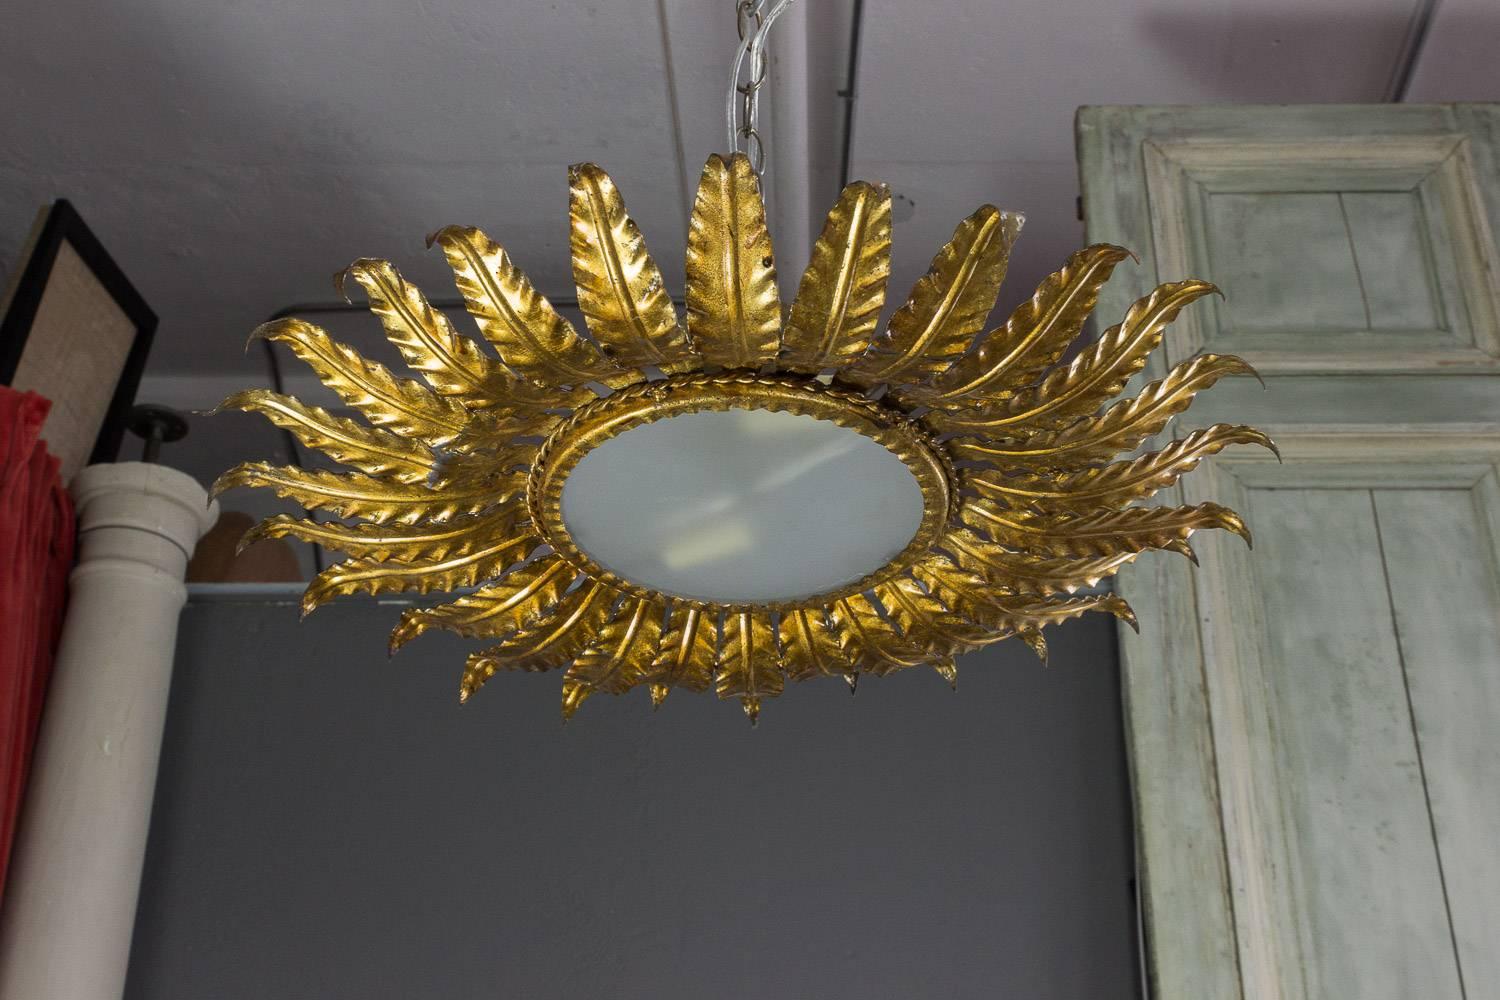 Spanish 1950s gilt metal ceiling fixture with radiating leaf motifs. The fixture has recently been rewired to accommodate two candelabra bulbs, and it is sold with a matching canopy. 

Ref #: LCF0516-03

Dimensions: 21.5